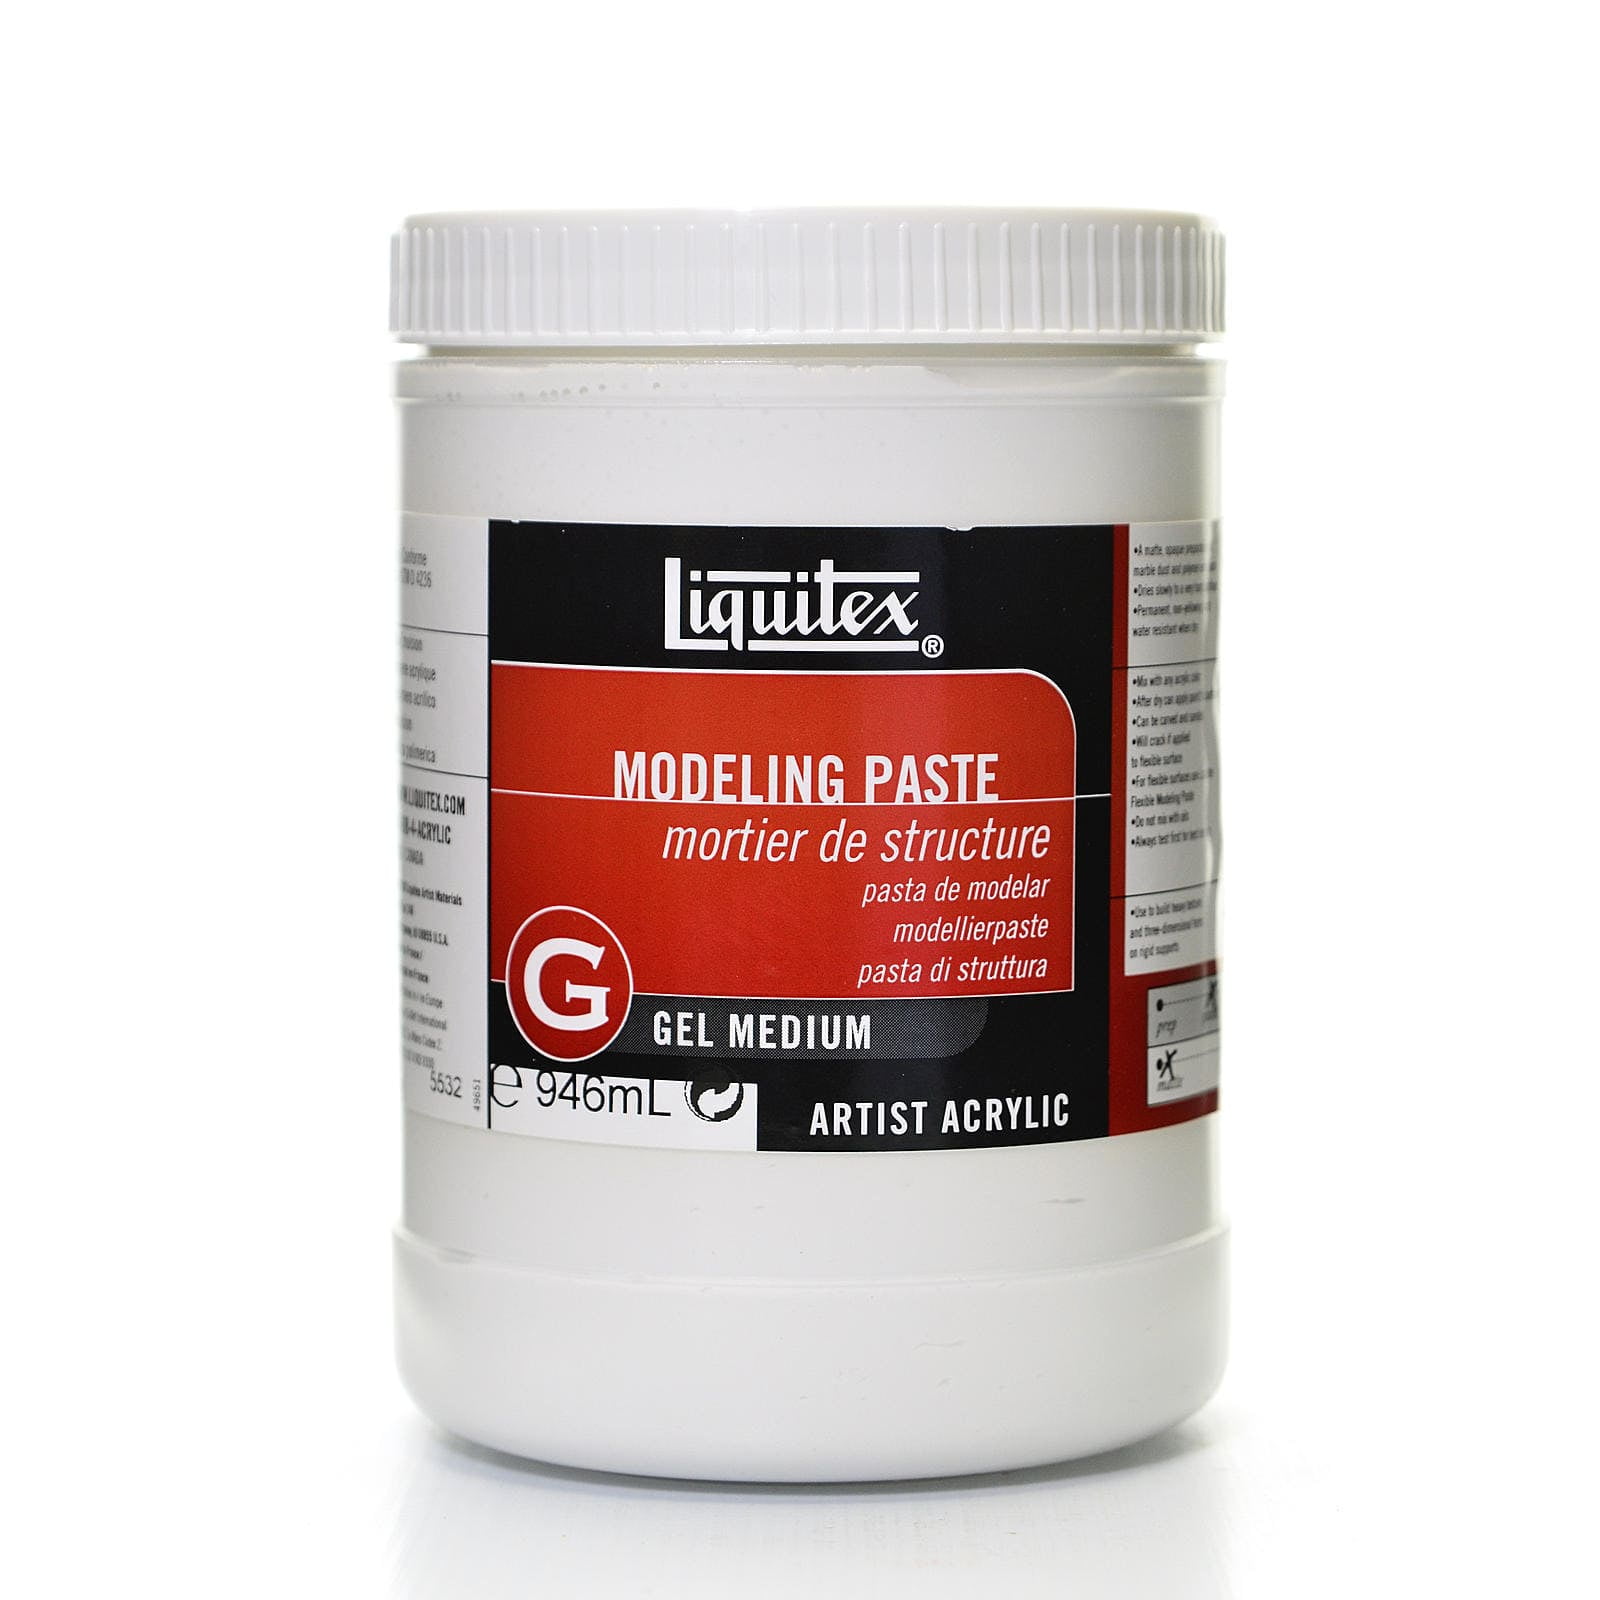 Using Liquitex Modeling Paste for Miniature Bases –